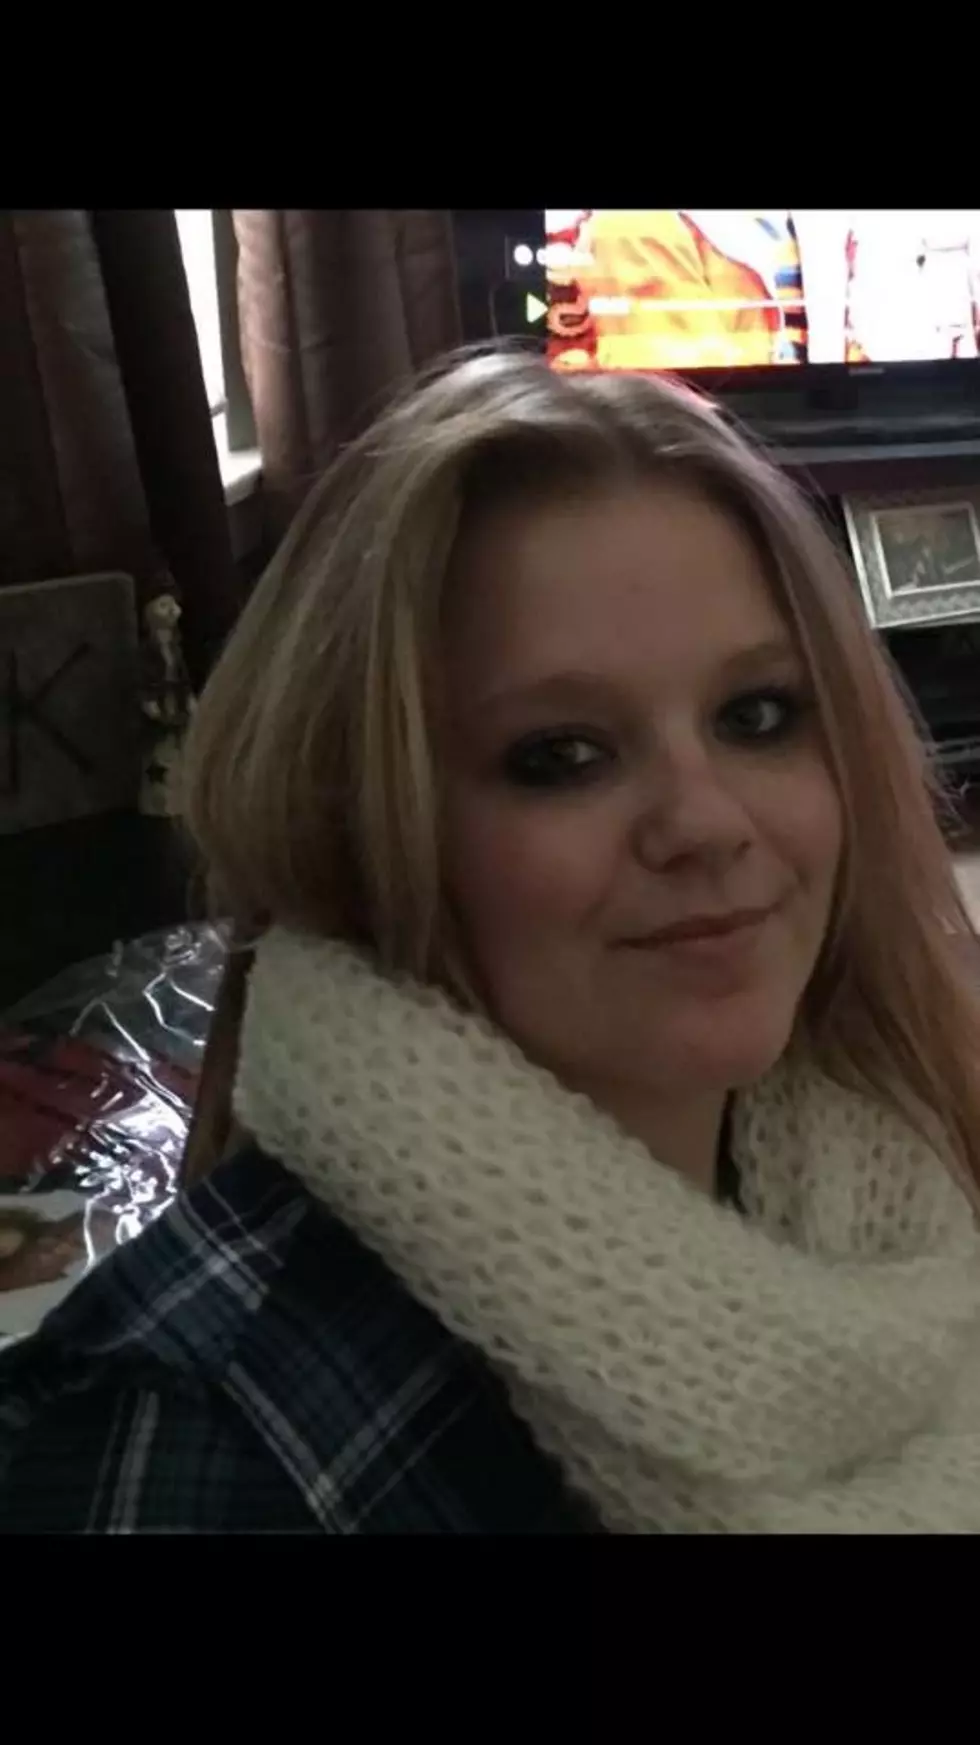 Have You Seen This Girl? Twin Falls Family Looking For 16-Year-Old Runaway